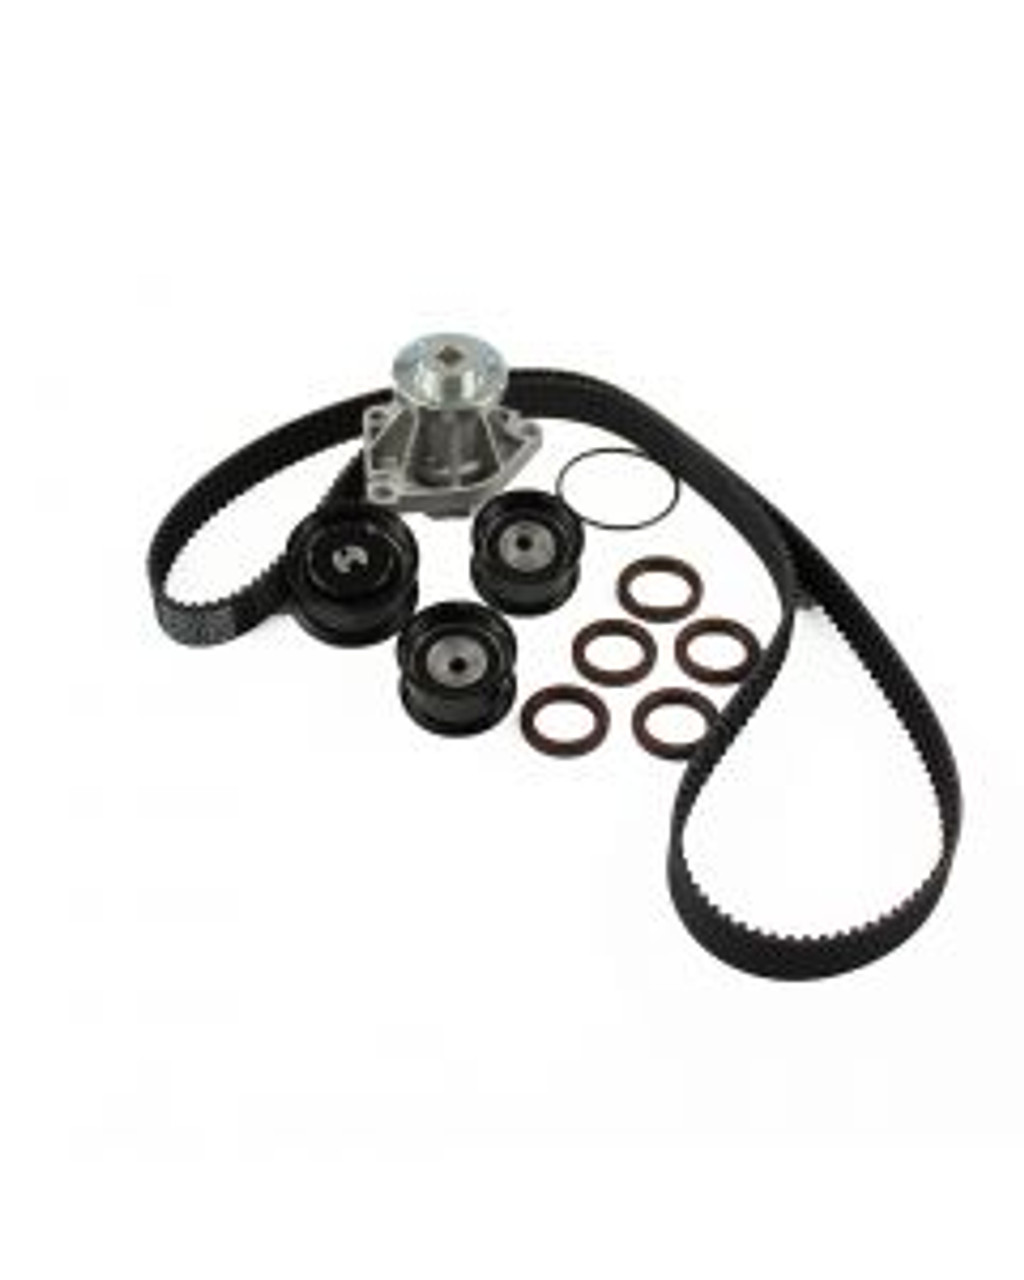 Timing Belt Kit with Water Pump 3.0L 2000 Cadillac Catera - TBK315WP.4